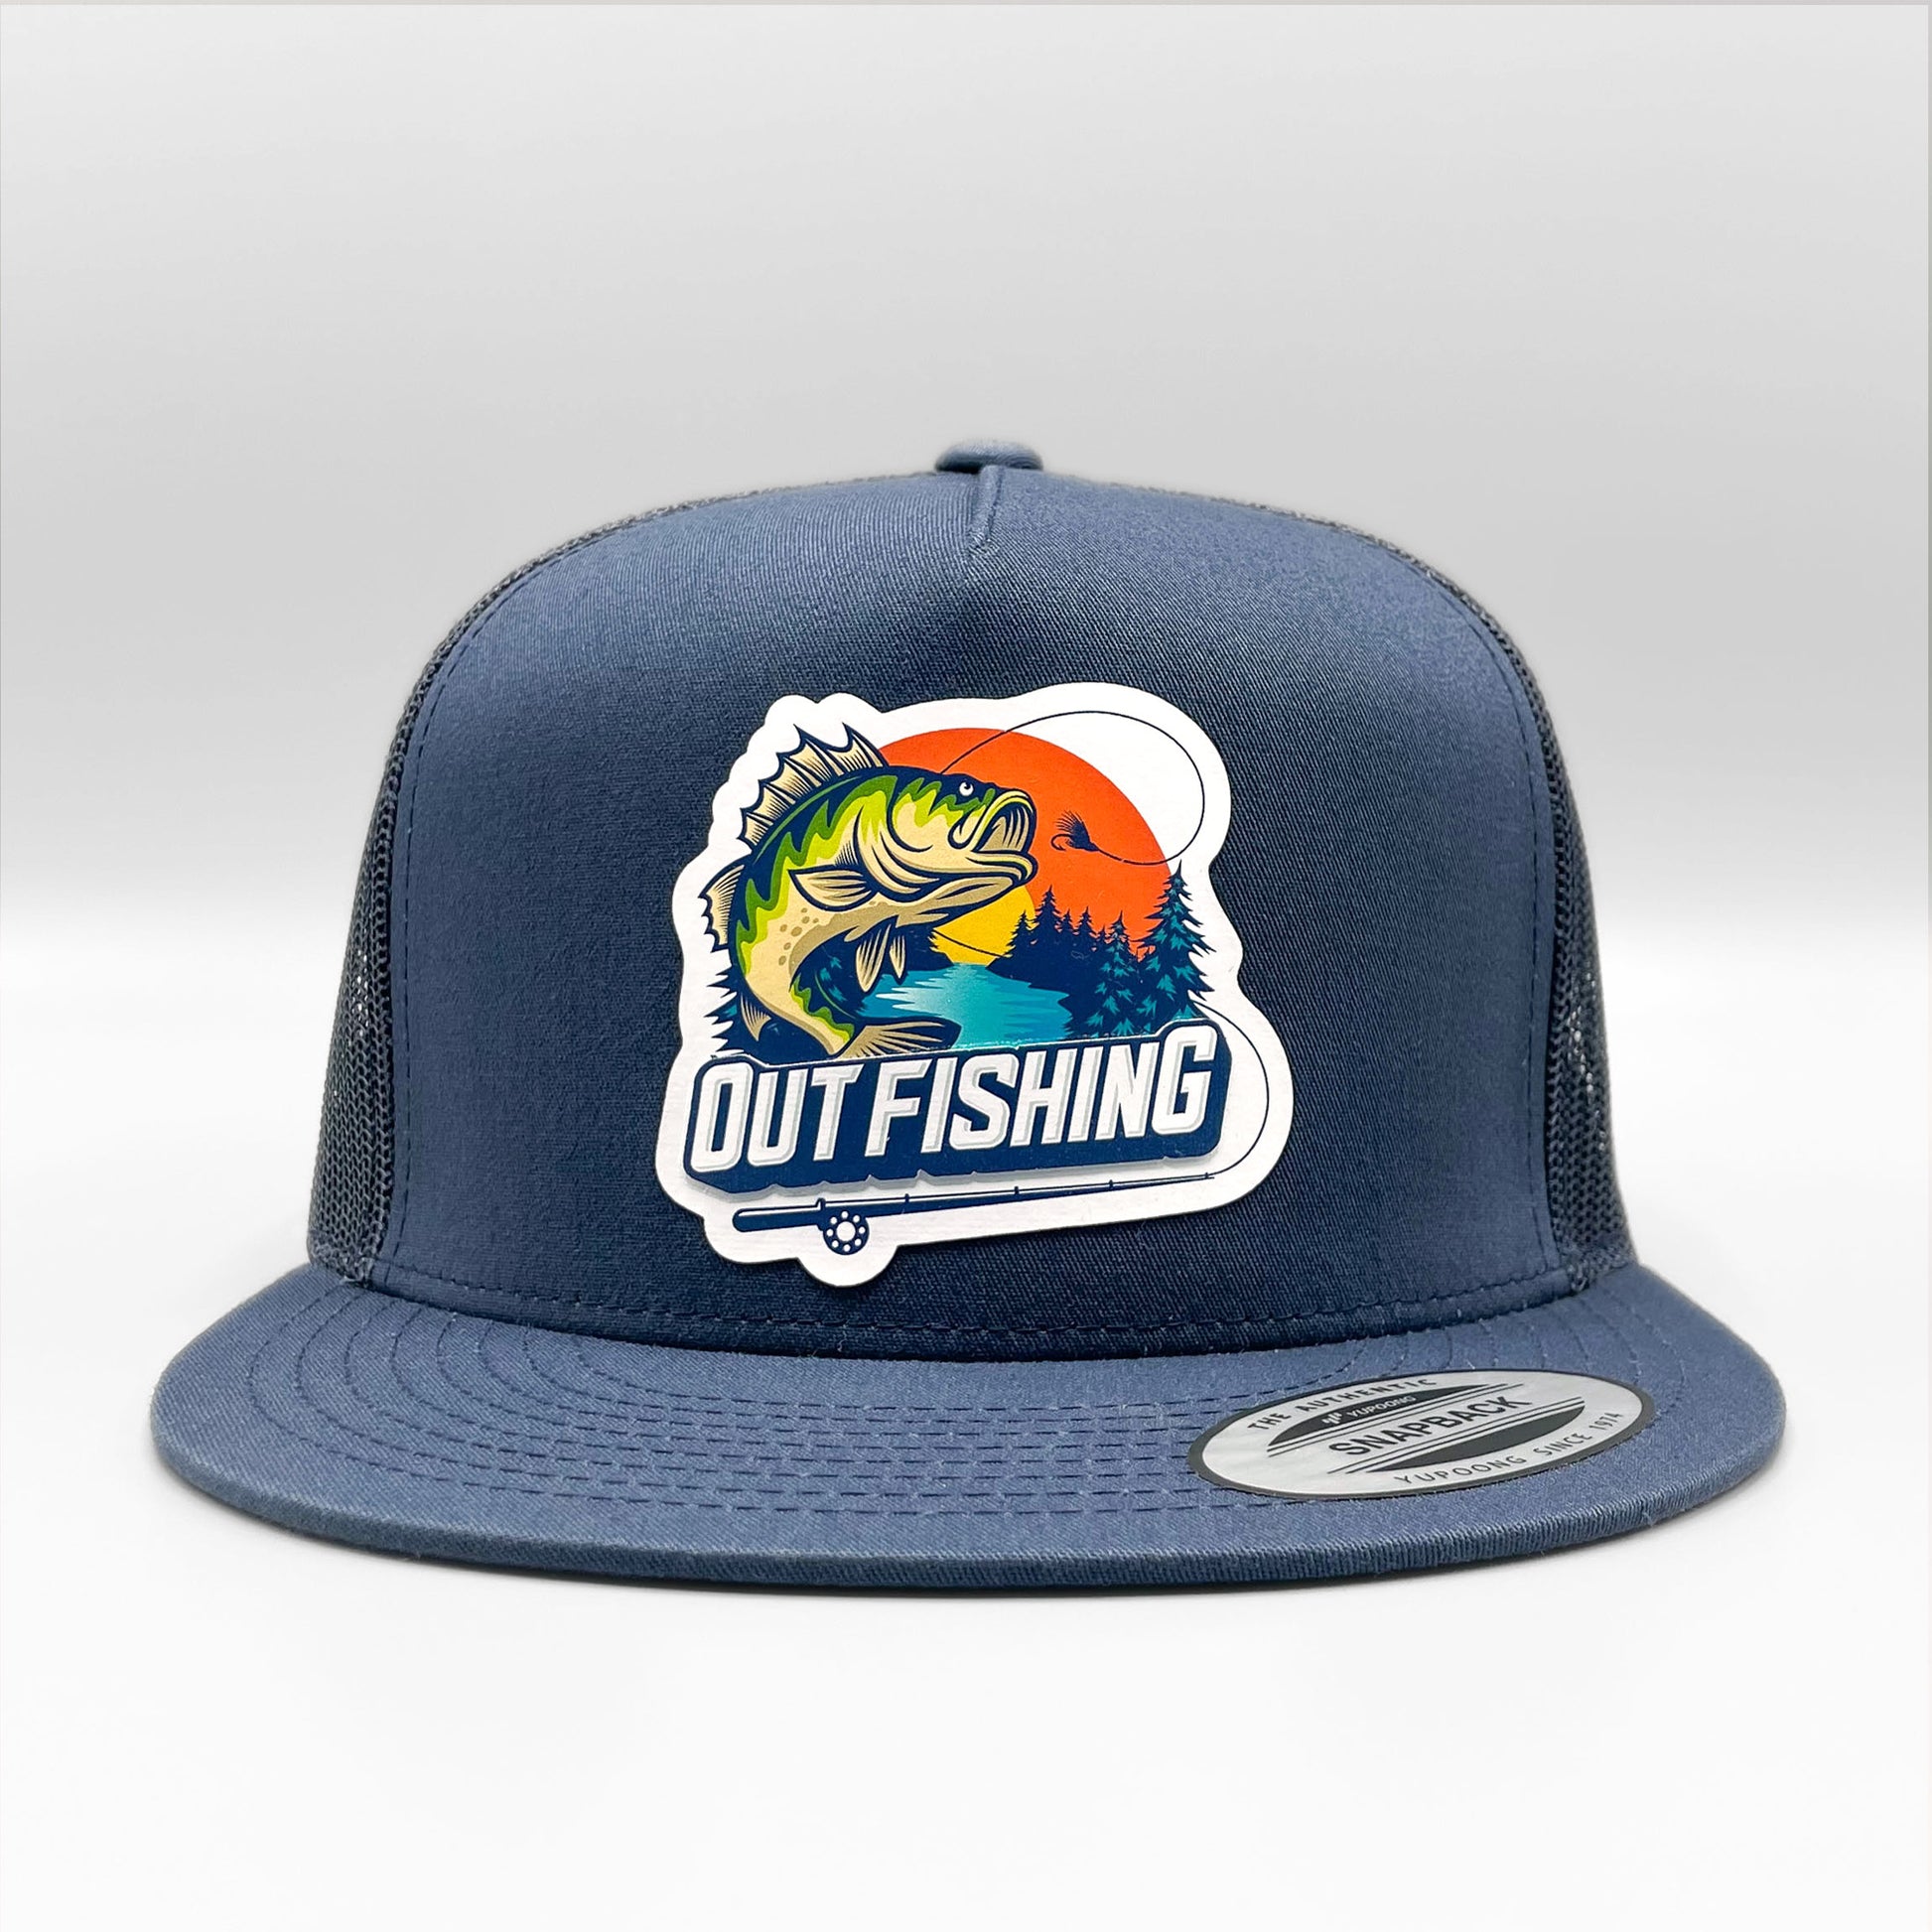 Out Bass Fishing Retro Trucker Hat, Raised Design on Navy Yupoong 6006 –  Vintage Truckers